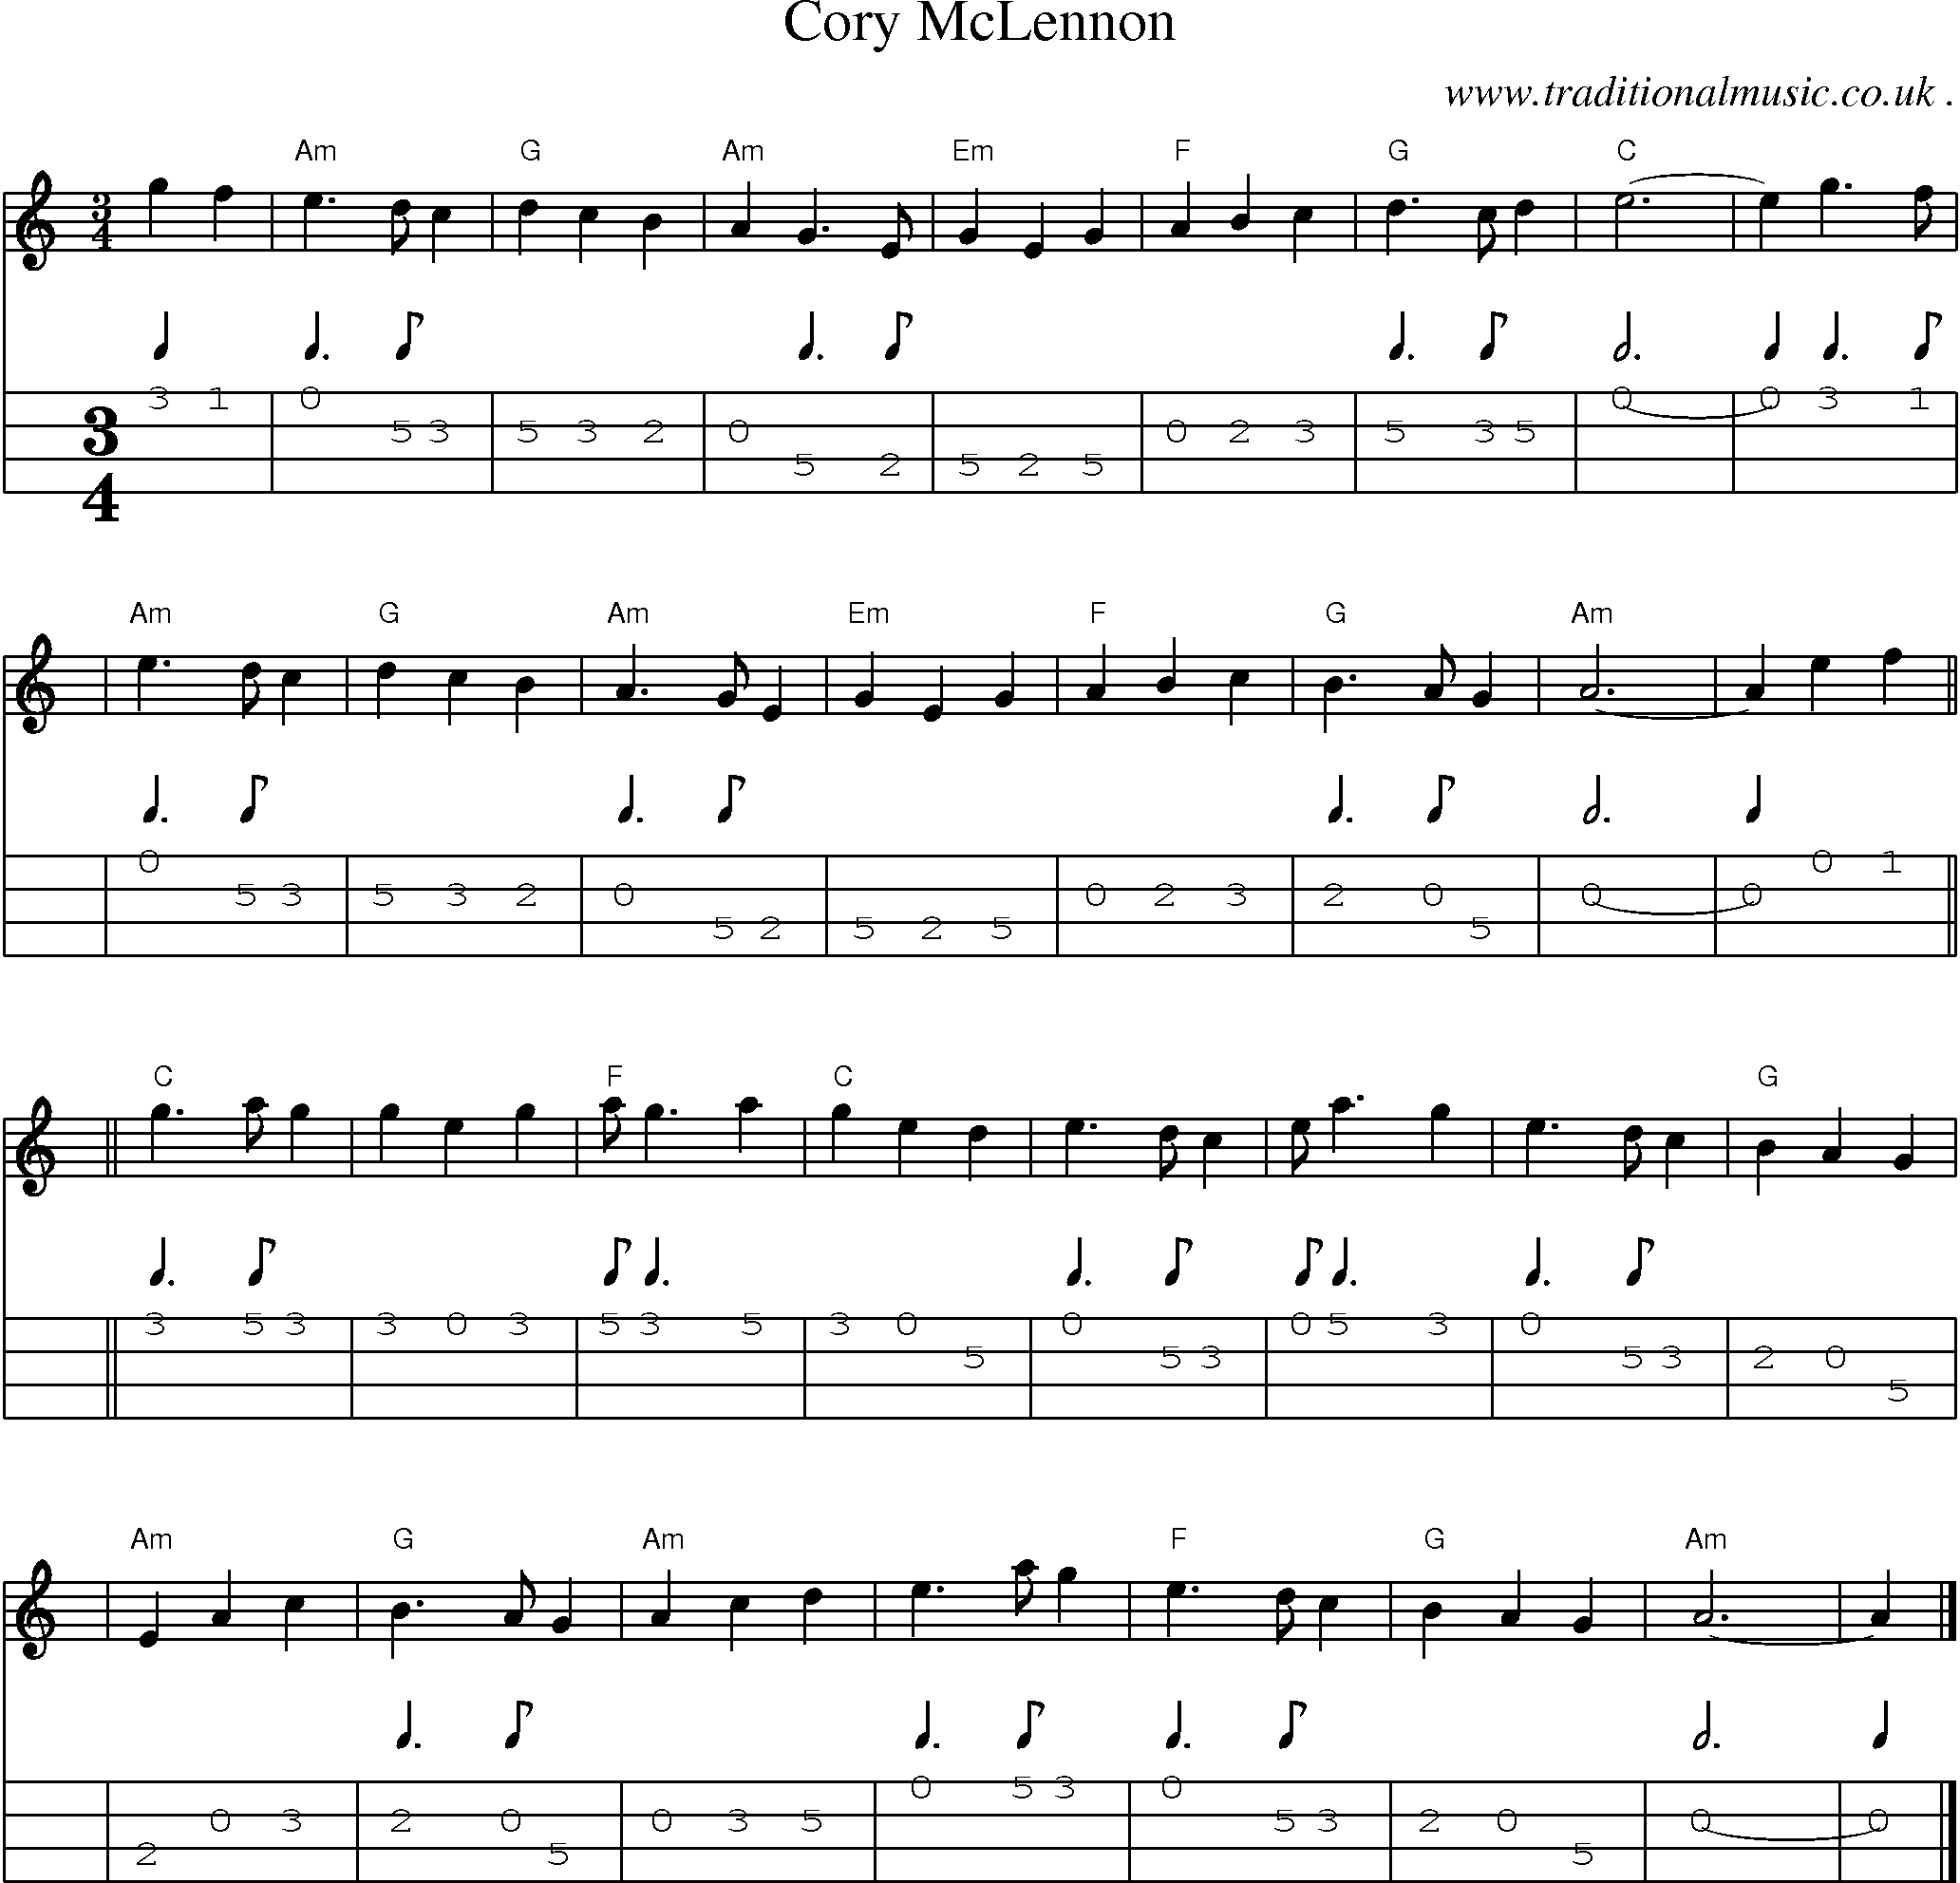 Sheet-music  score, Chords and Mandolin Tabs for Cory Mclennon